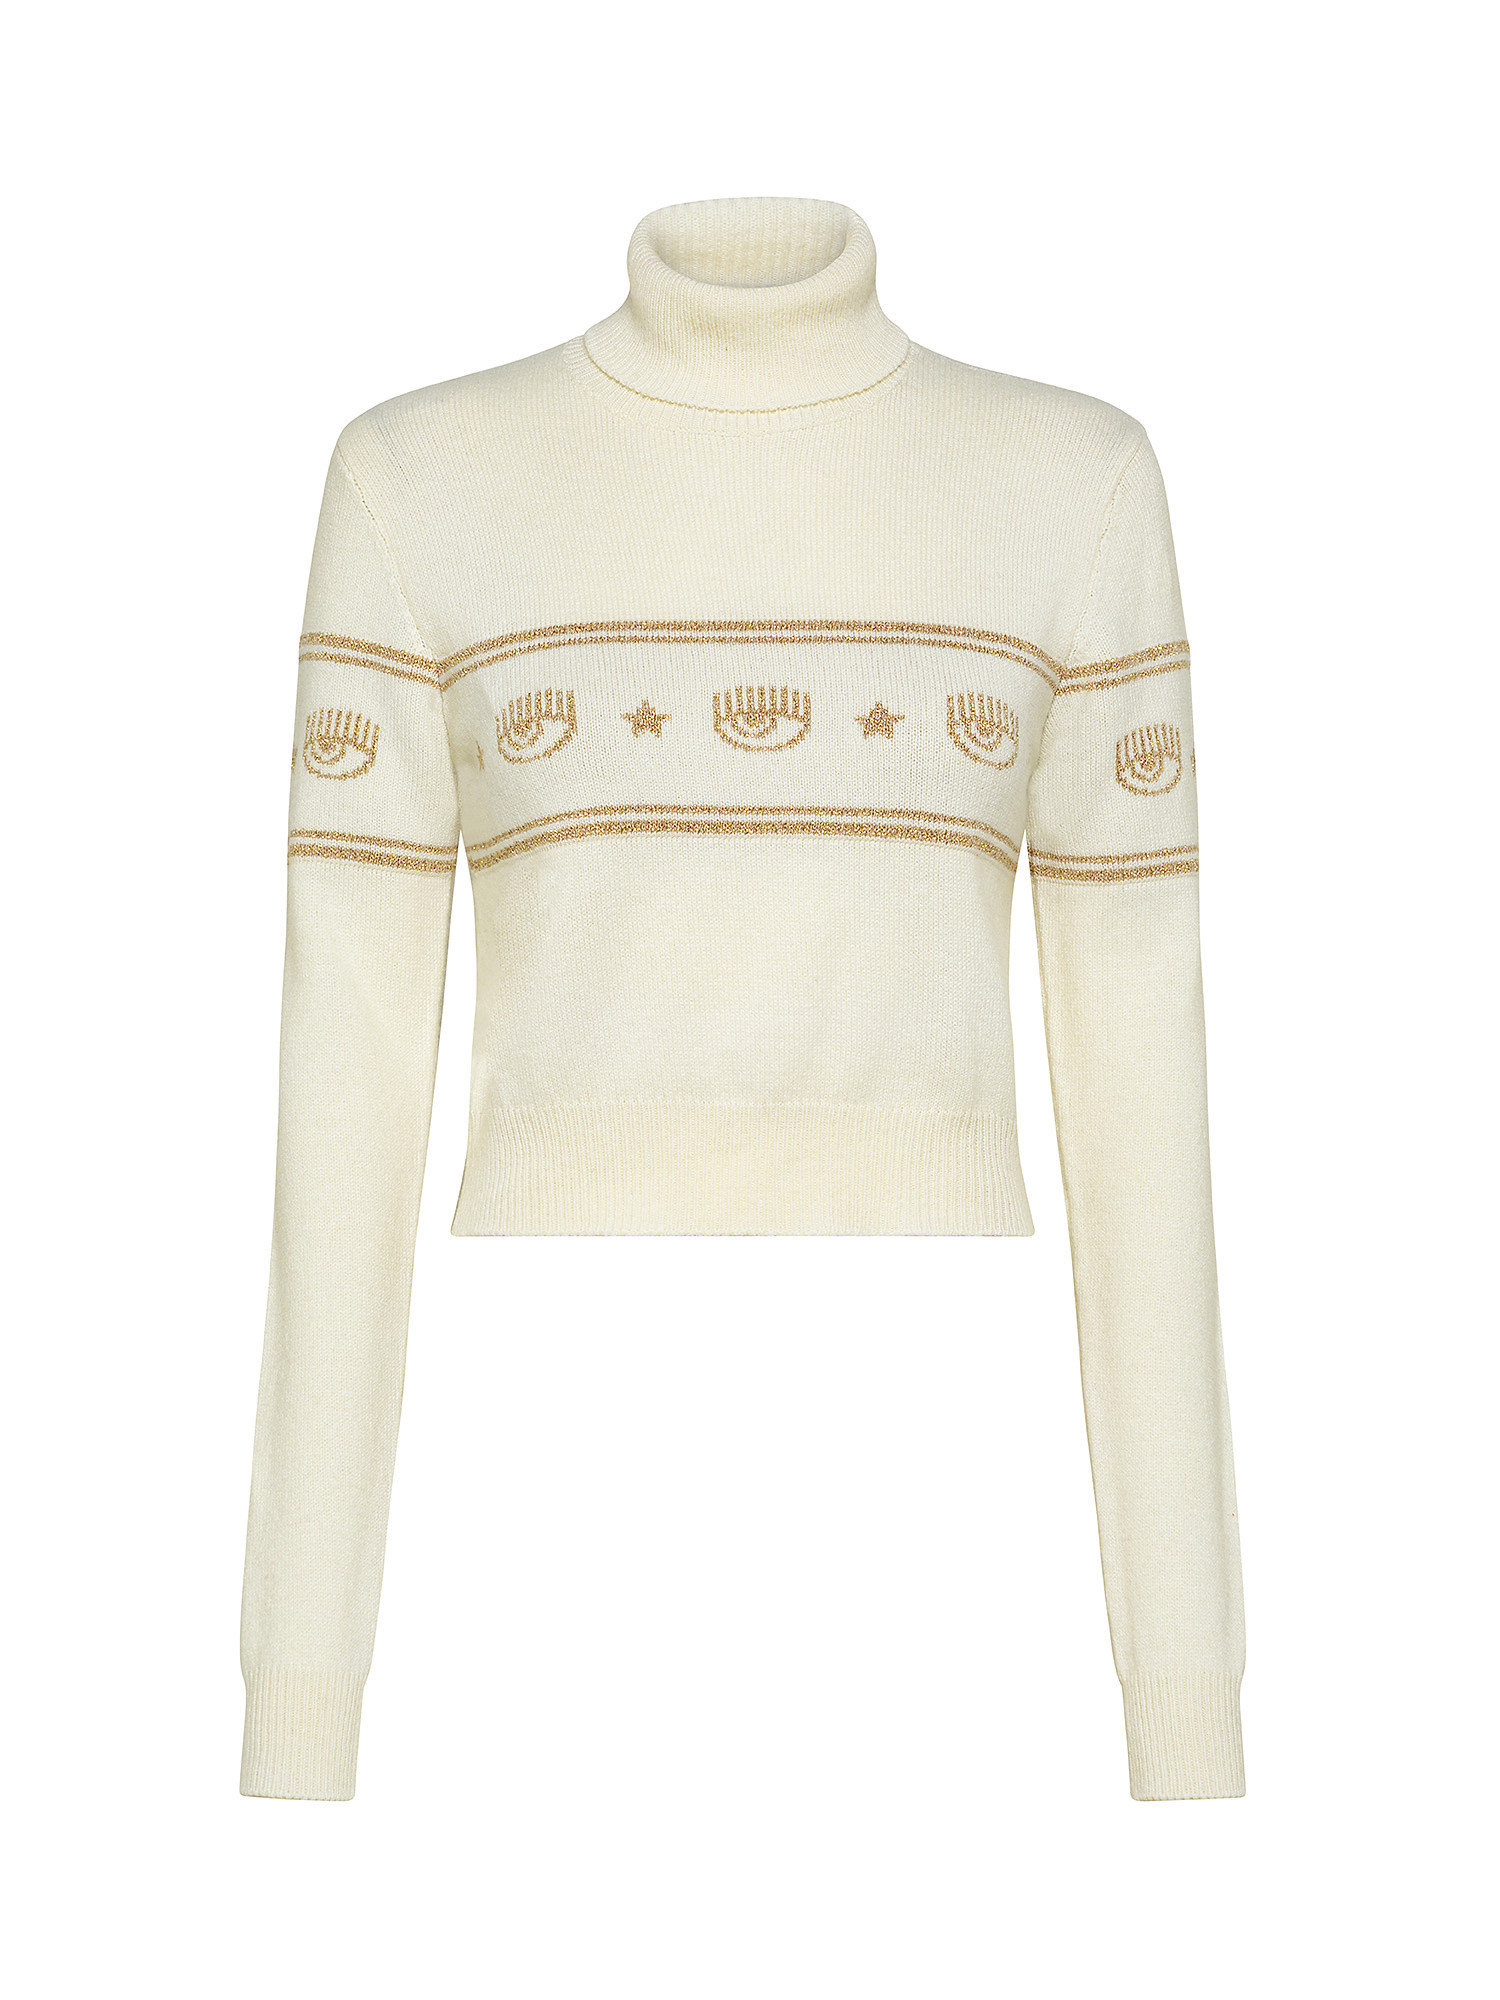 Sweater with logo, White, large image number 0